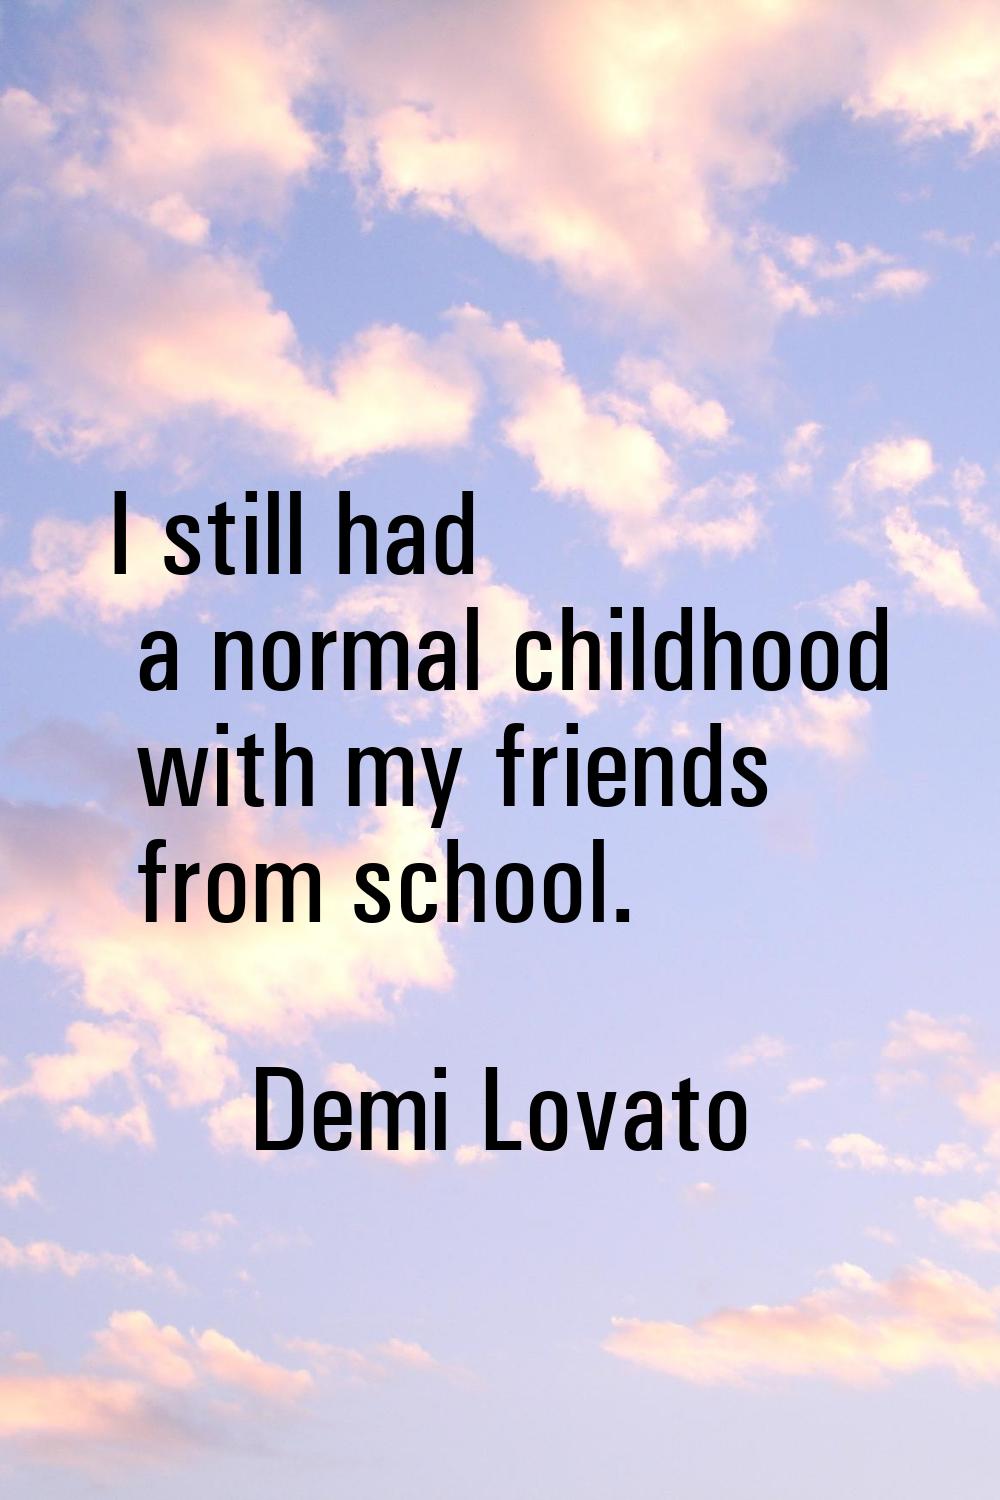 I still had a normal childhood with my friends from school.